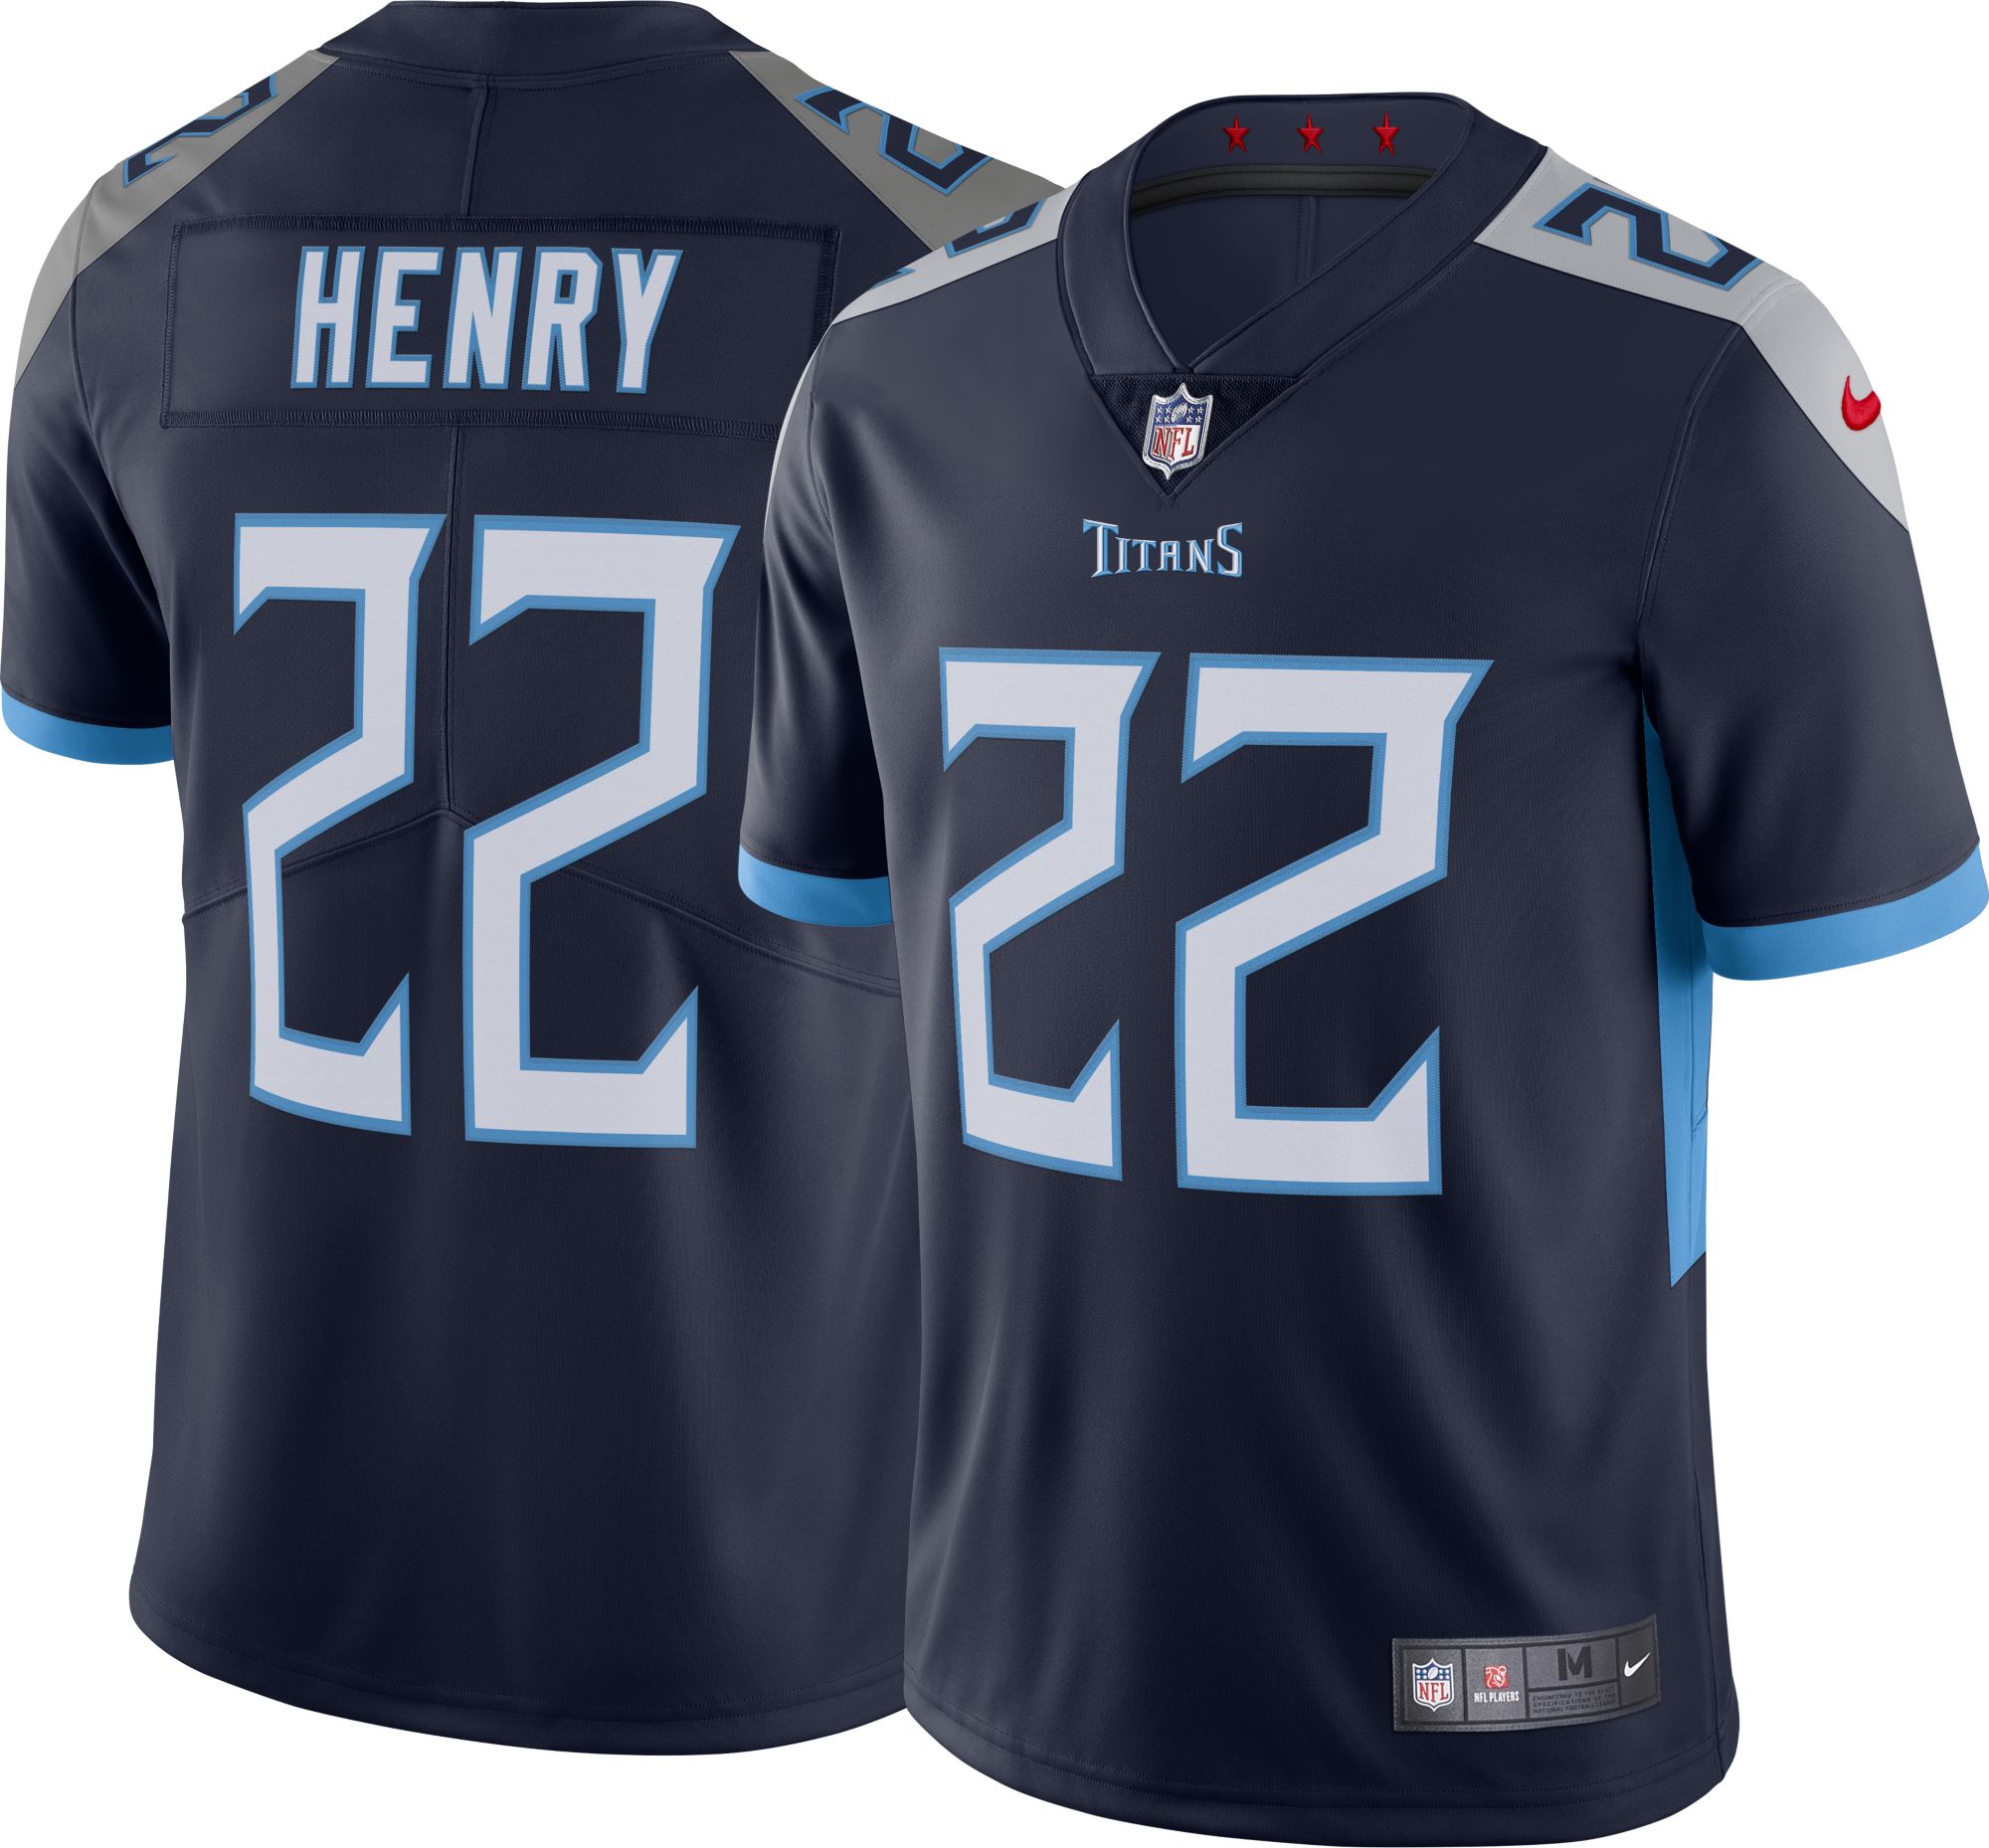 Nike / Men's Tennessee Titans Derrick Henry #22 Navy Limited Jersey